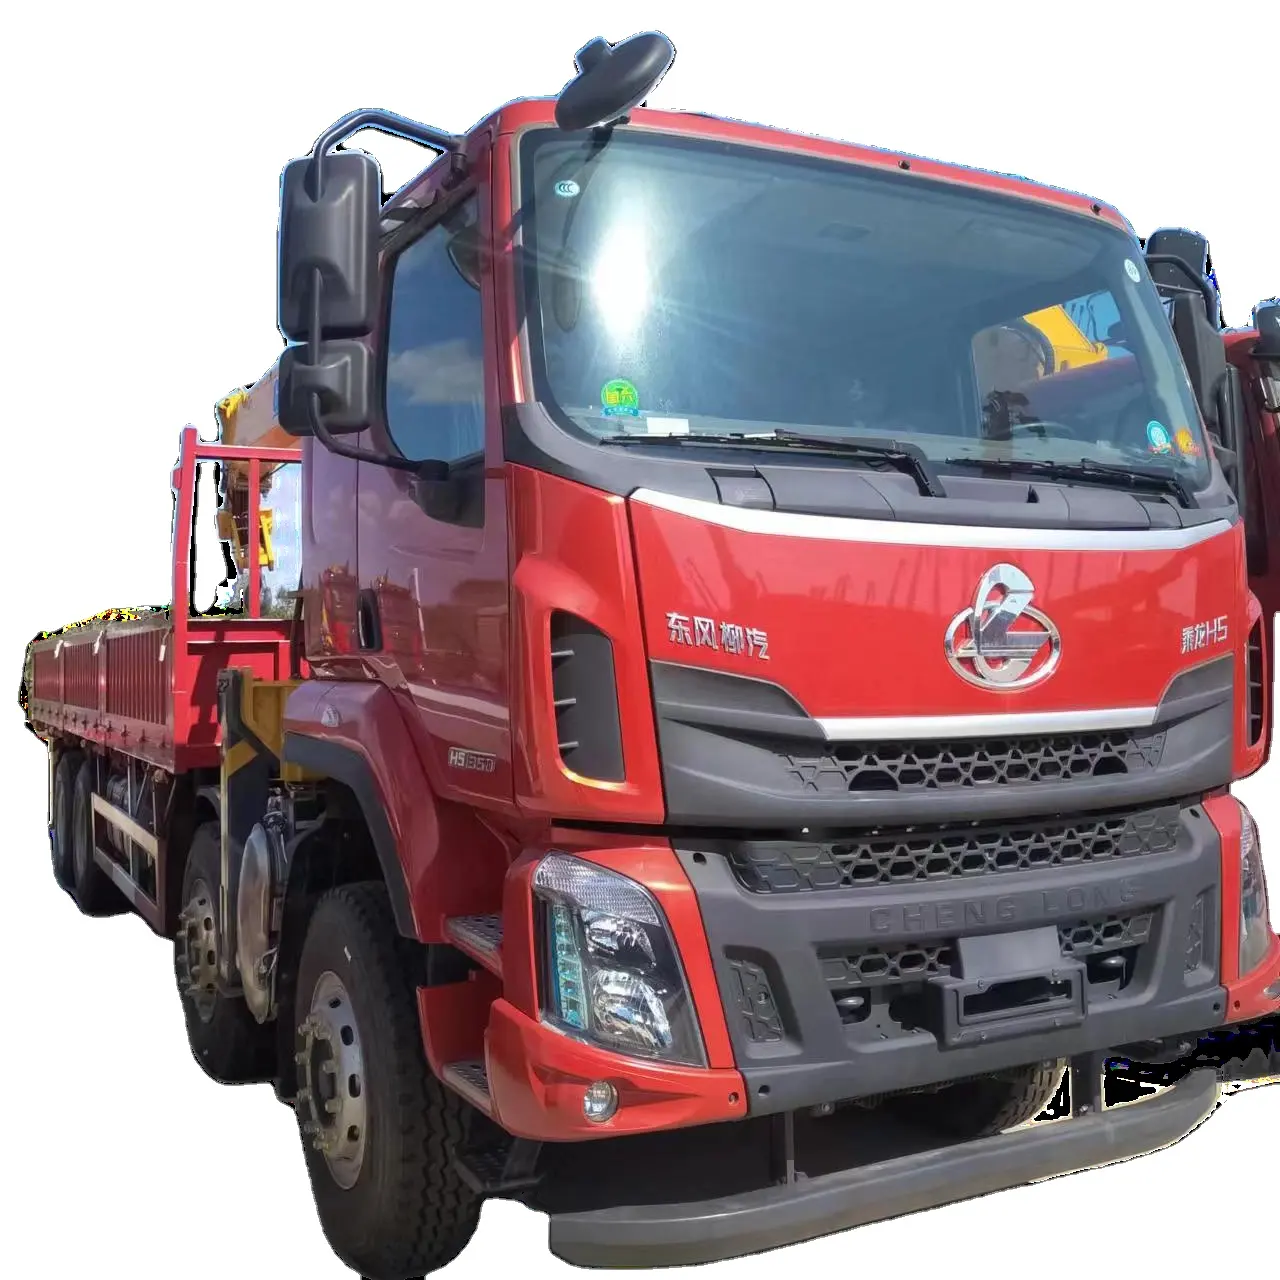 Dongfeng chassis XCM G 14 tons telescopic boom lorry loading crane cargo truck with cranes boom truck new used truck price